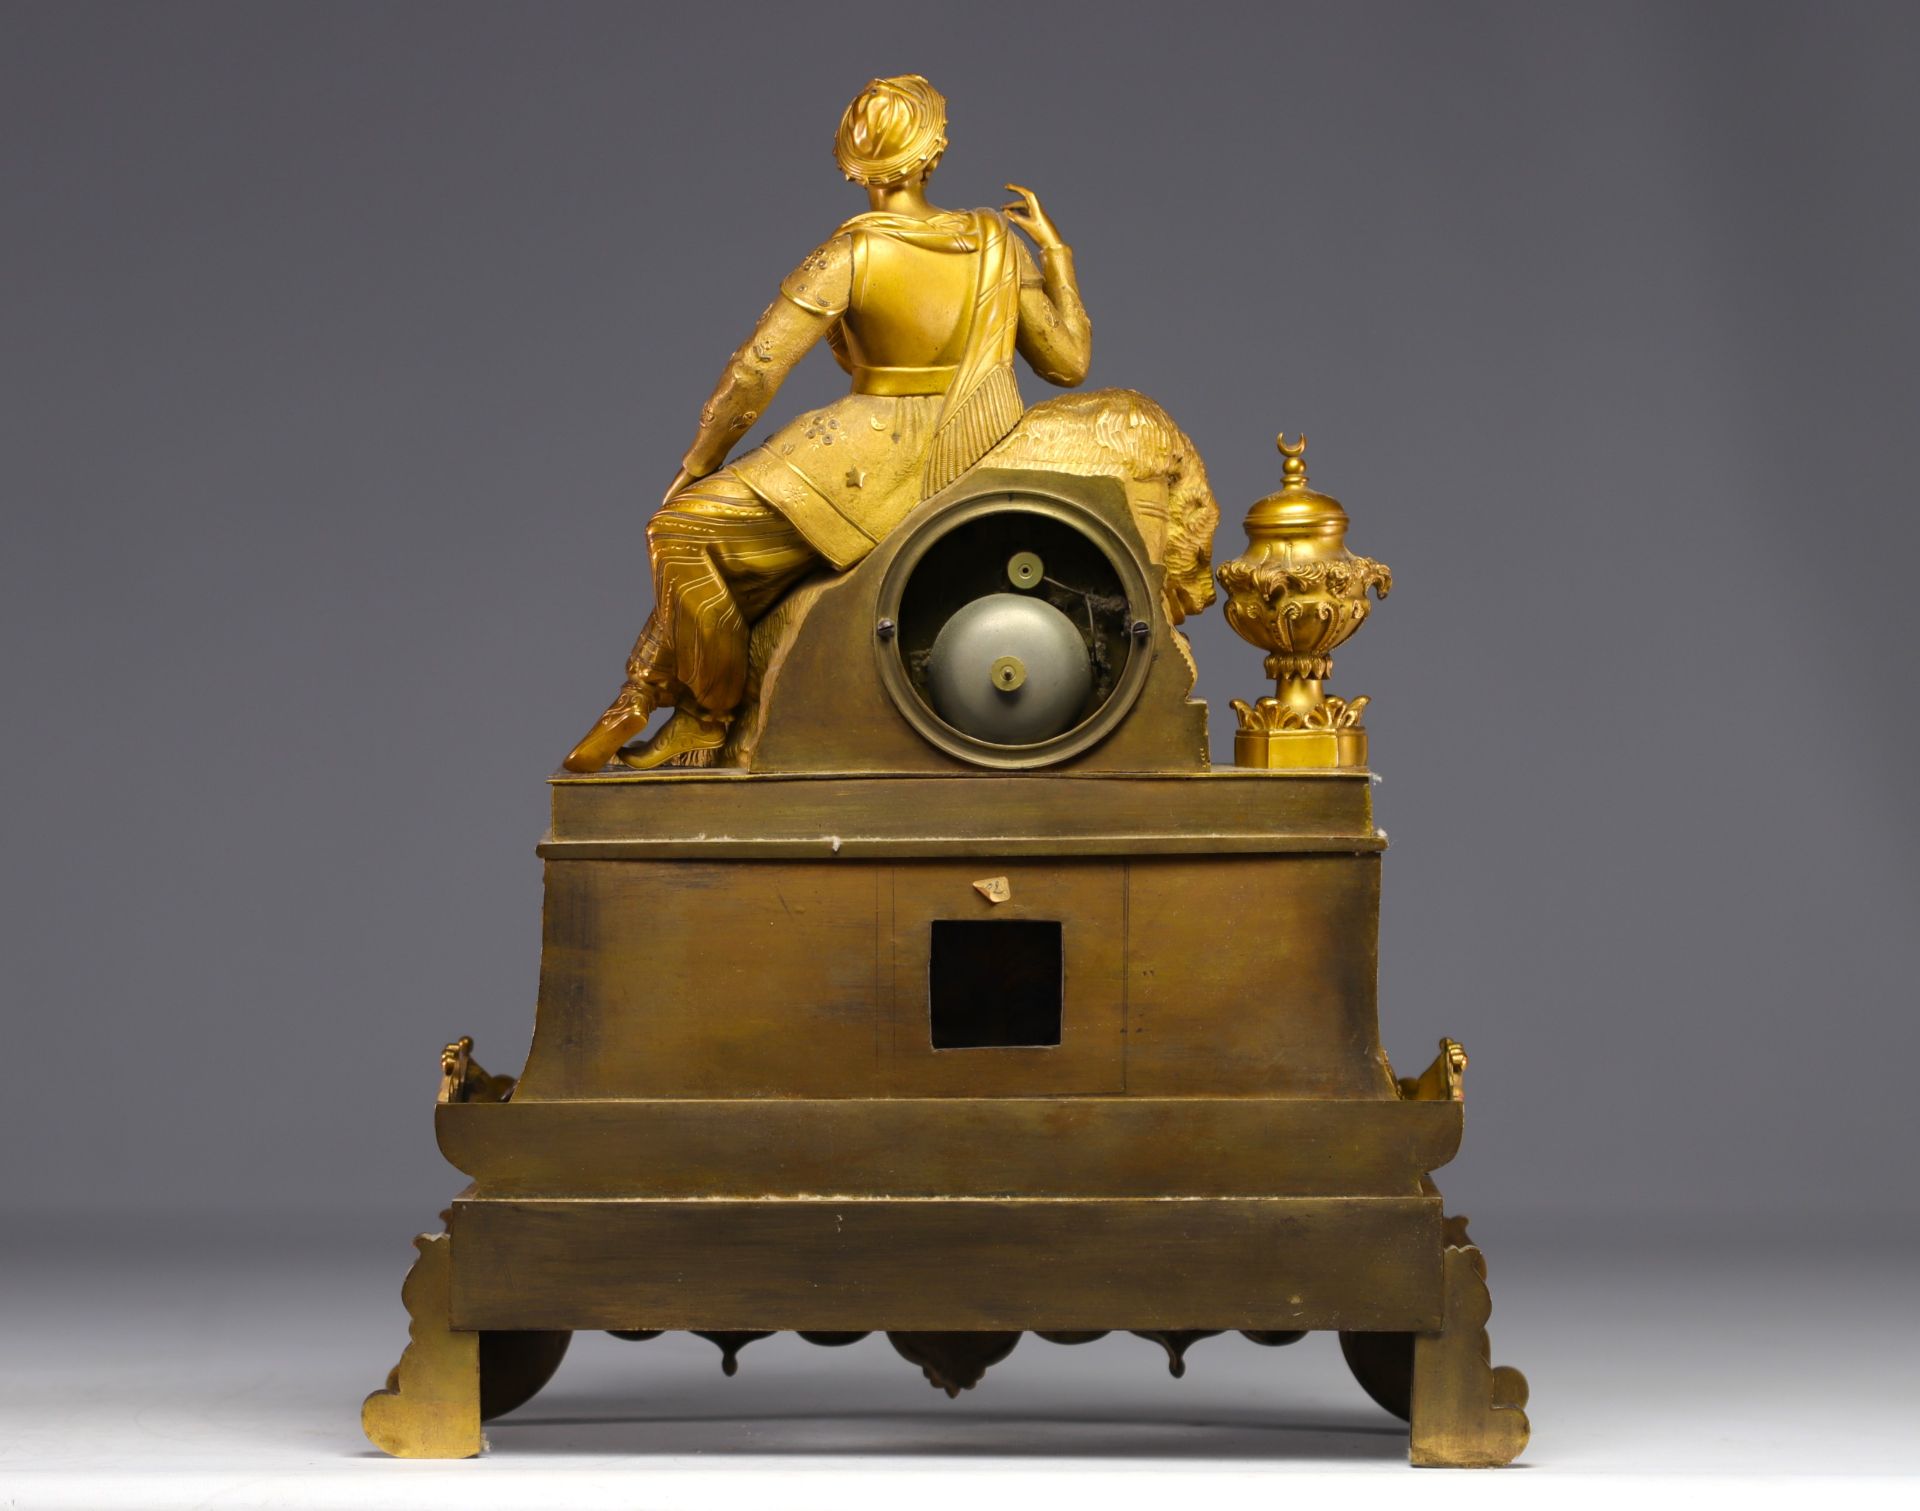 Gilt bronze clock and candelabra with Orientalist subjects, early 19th century. - Image 4 of 4